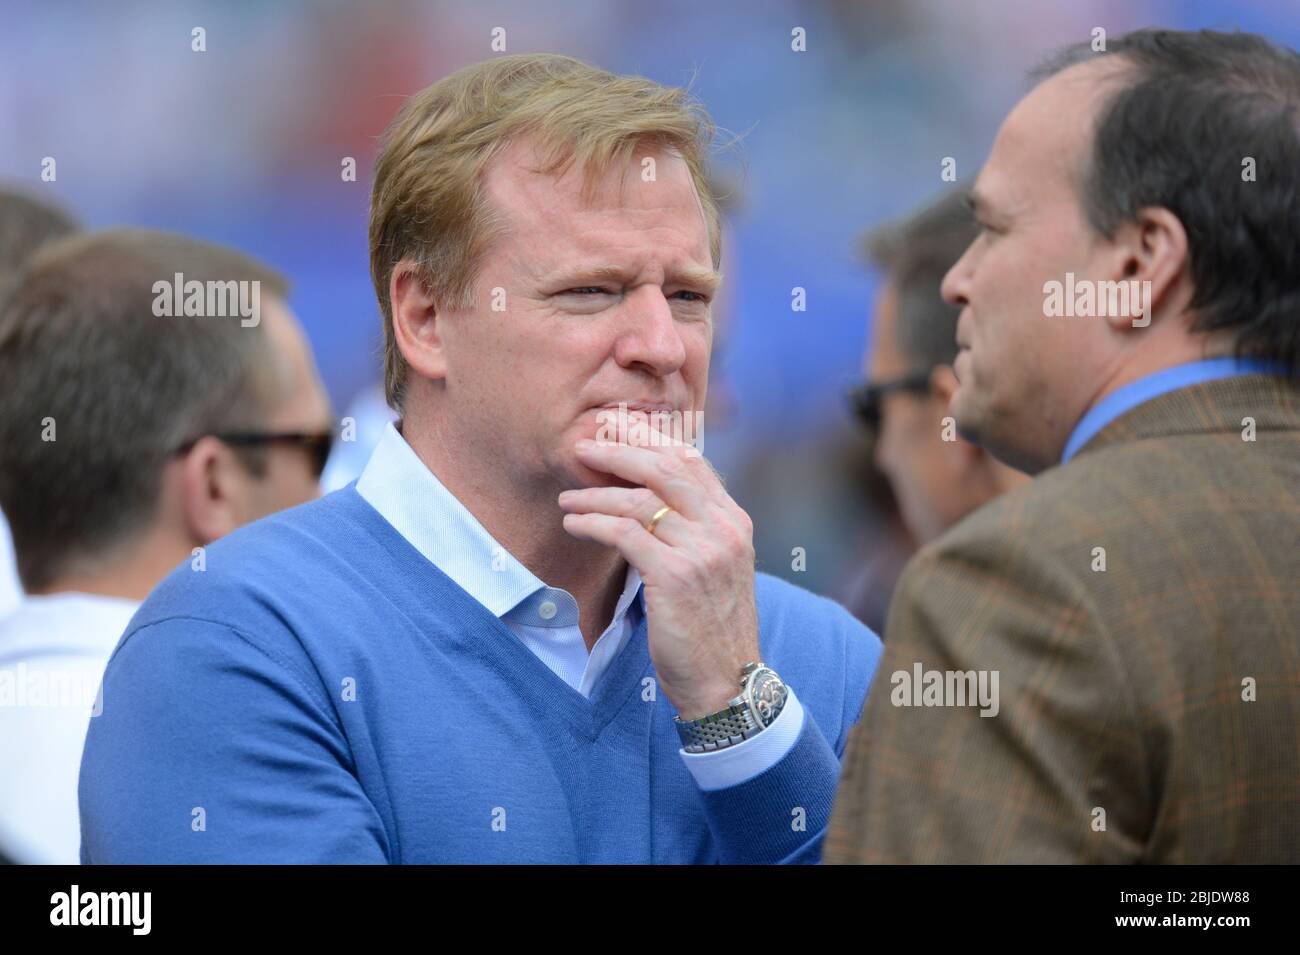 16 September 2012: National Football League Commissioner Roger Goodell during a week 2 NFL NFC matchup between the Tampa Bay Buccaneers and New York G Stock Photo